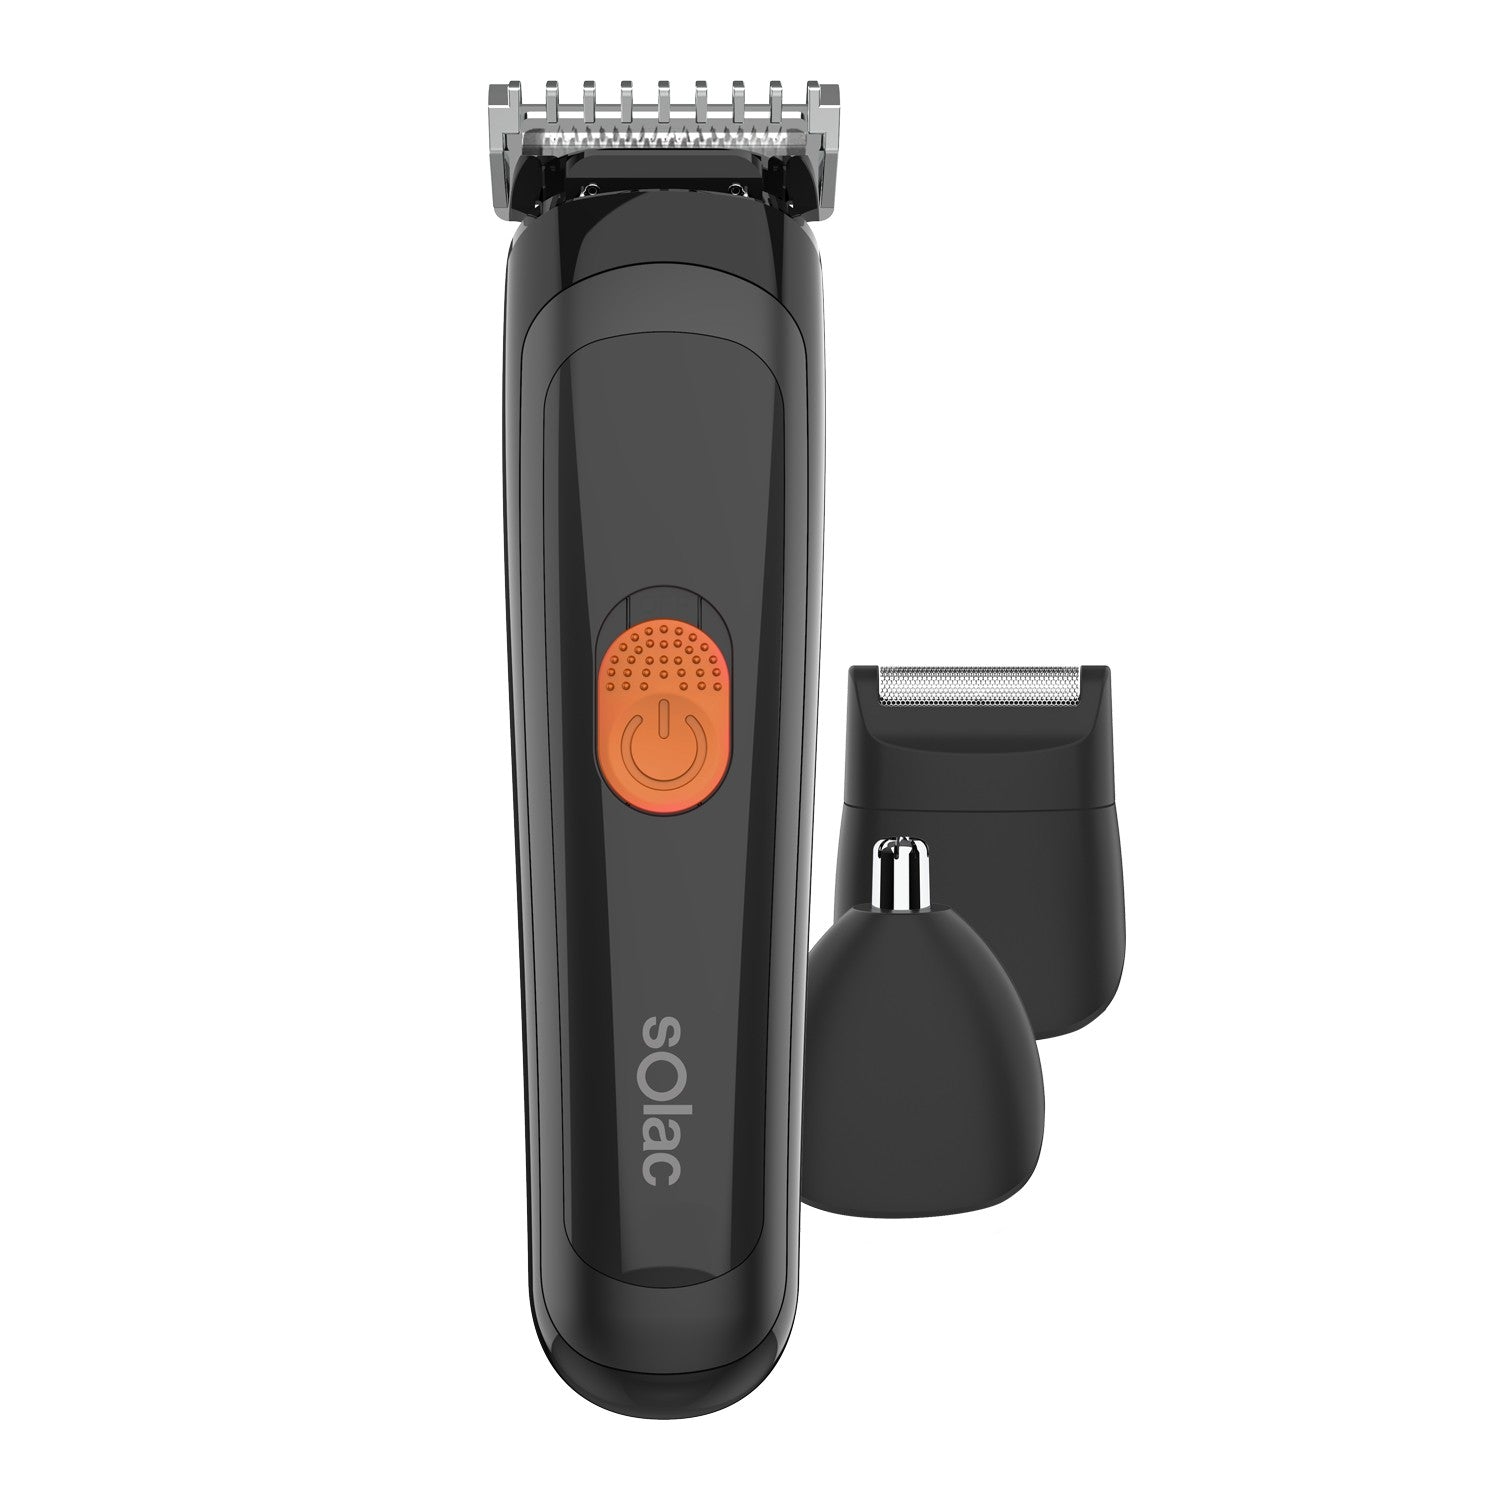 CP-7397 / Solac SHAVER black lethuiom battry / 10 degrees /stanlessteel blades / ear and nosie shave black / 10 c / BLACK